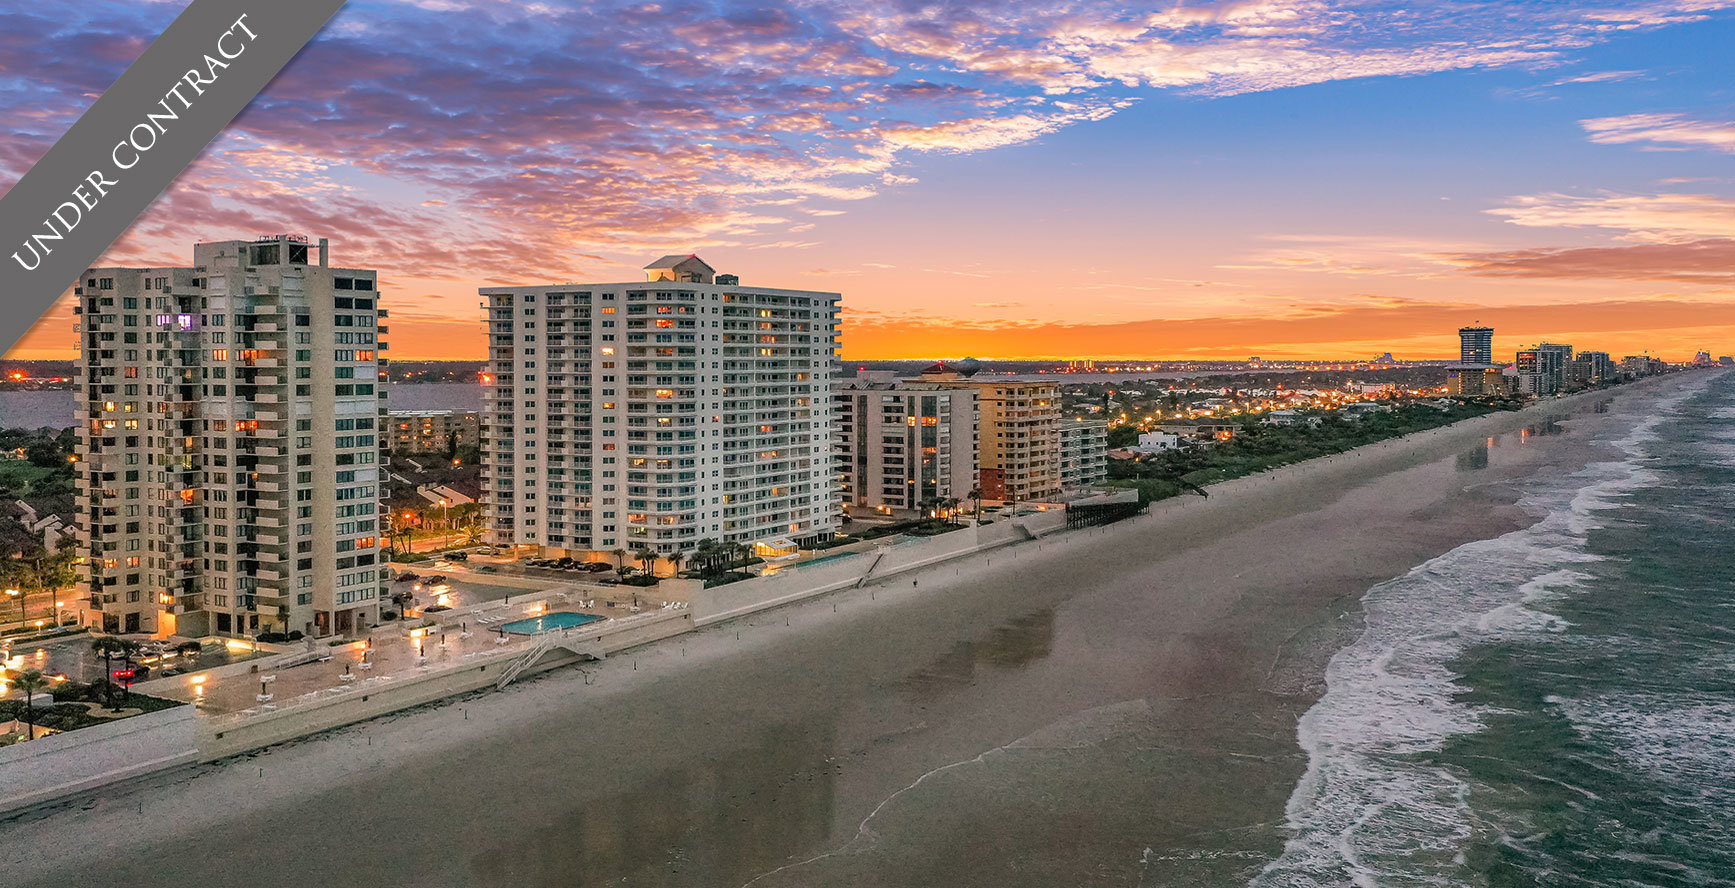 Oceans Seven Condos For Sale Oceanfront Real Estate at 2947 S Atlantic Ave Daytona Beach Shores, FL  Under Contract